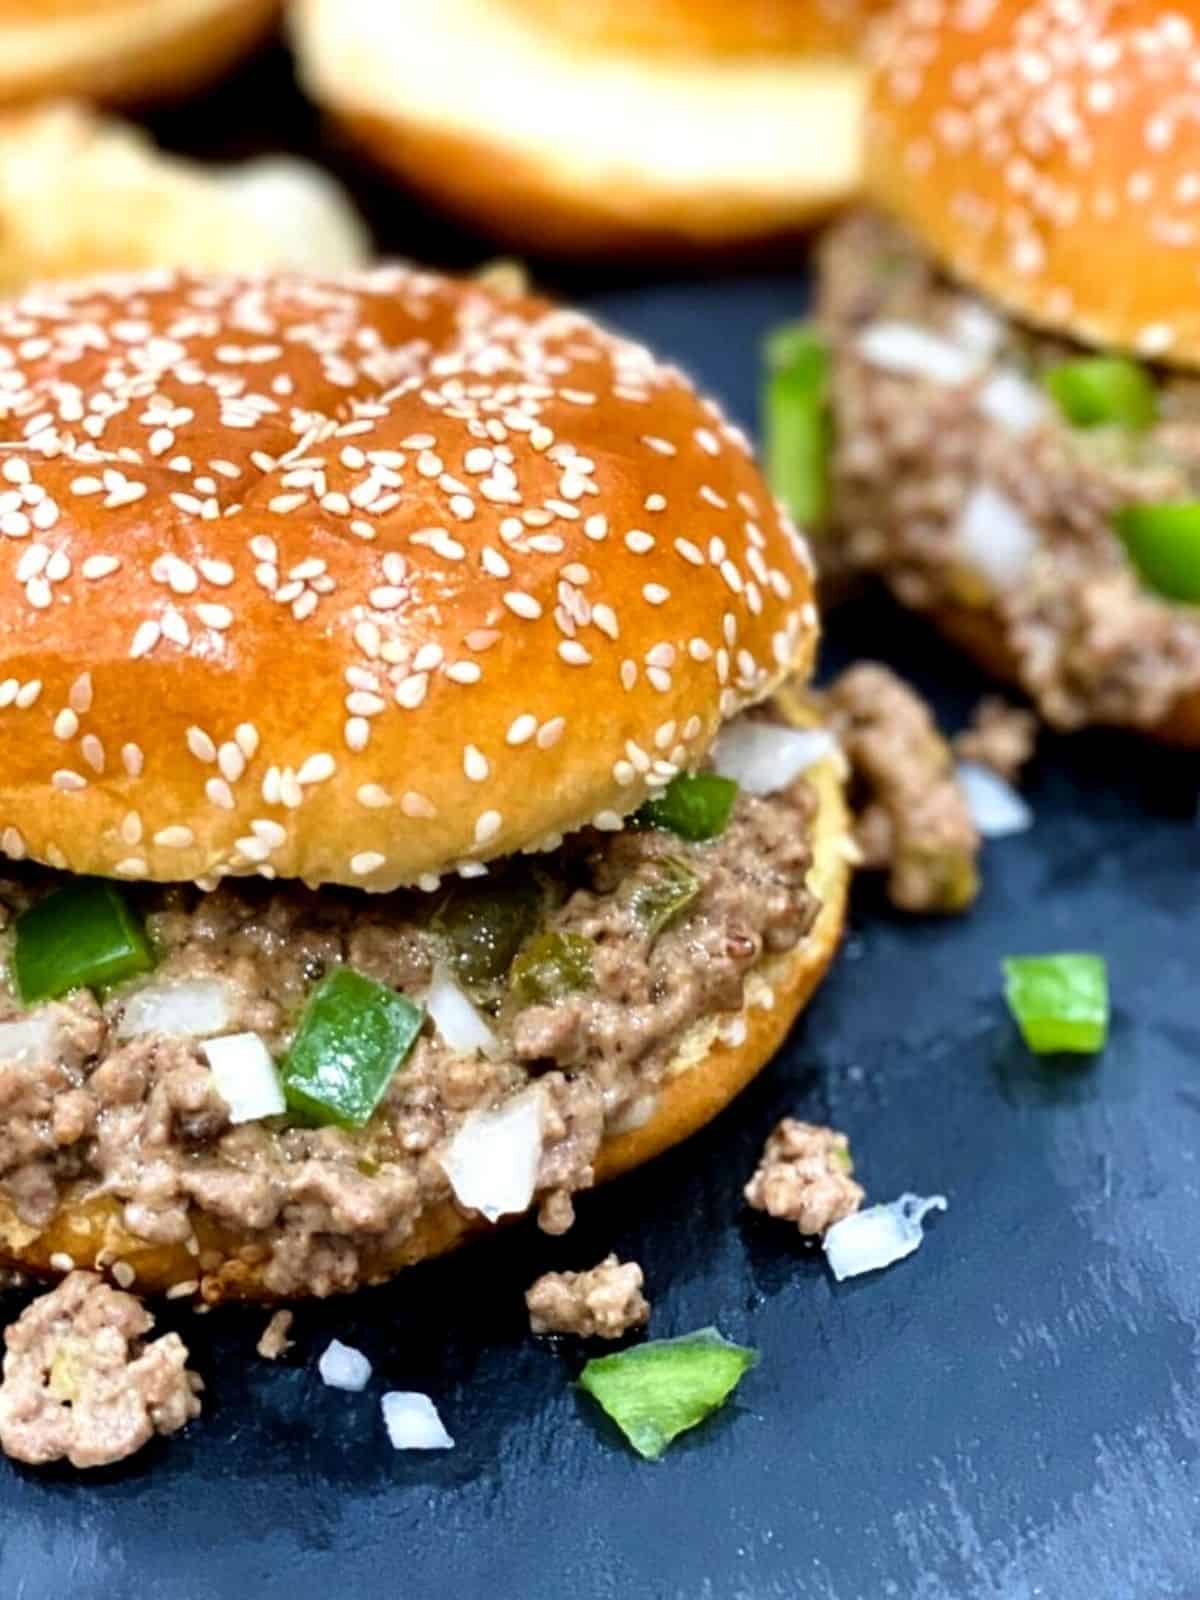 Sloppy Joes served on a burger bun with green pepper and onion.